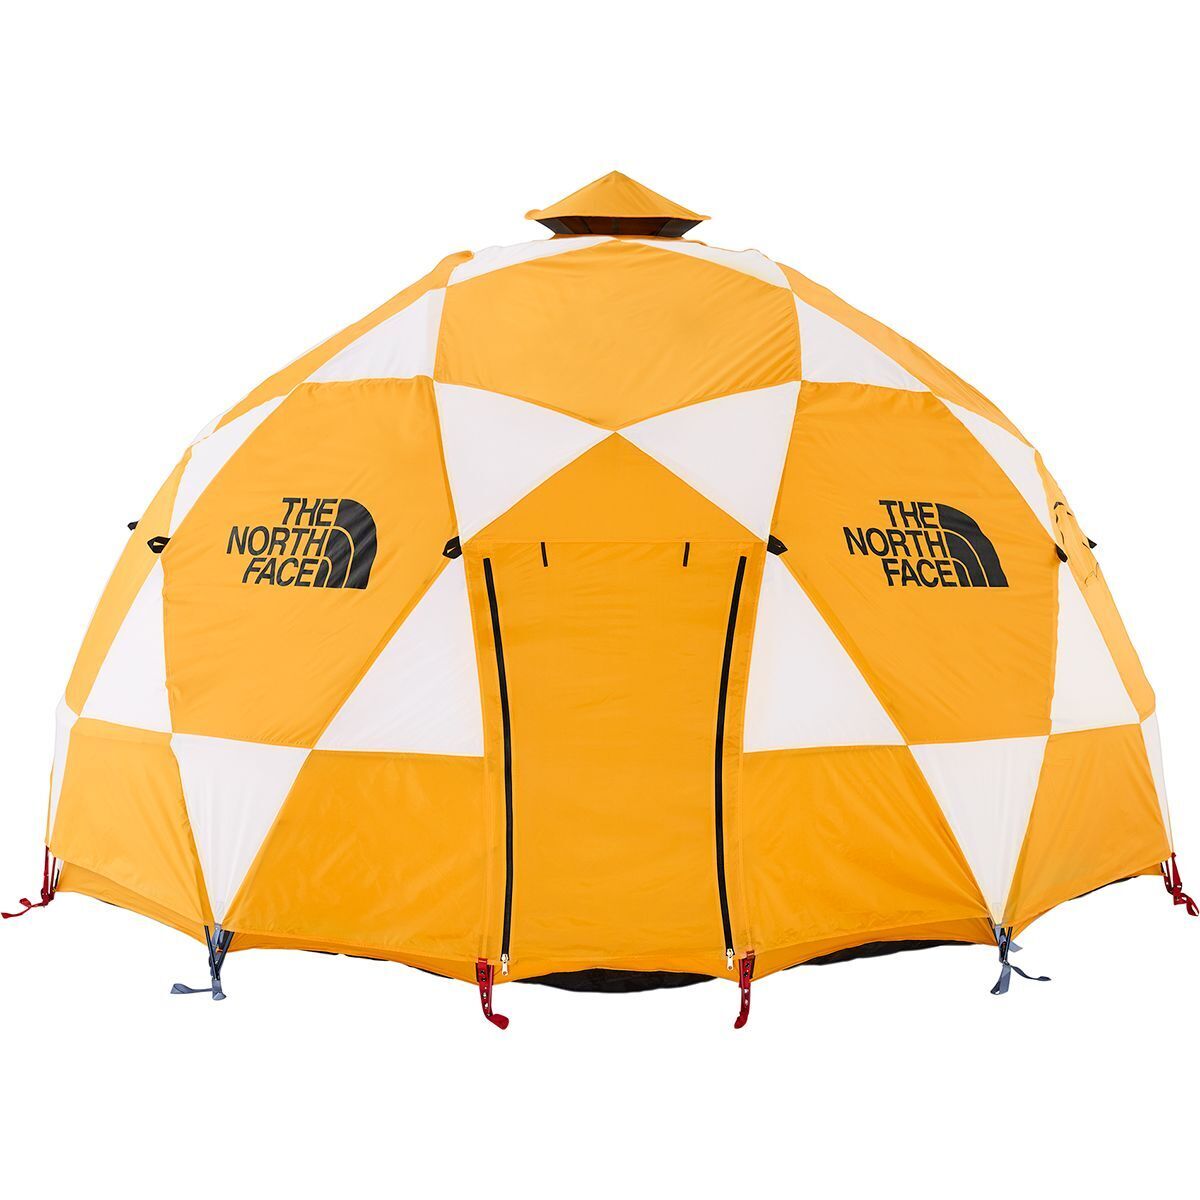 The North Face 2-Meter Dome Tent: 8-Person 4-Season